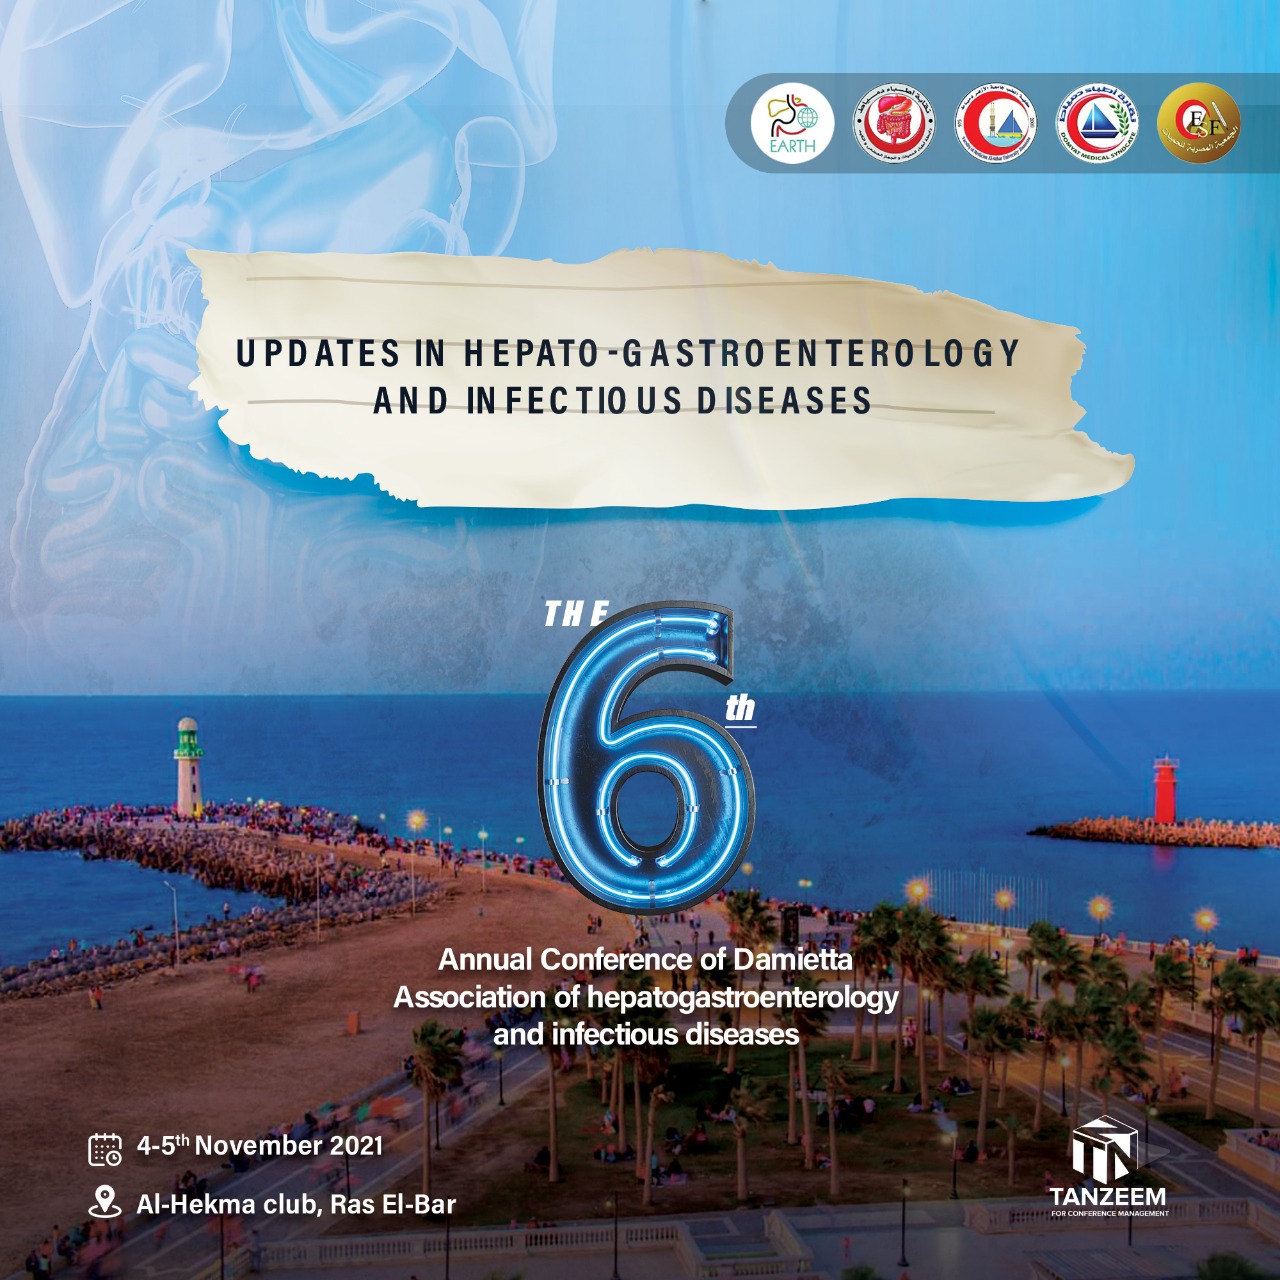 The 6th Annual Conference of Damietta Association of Hepatogastroenterology and Infectious Diseases